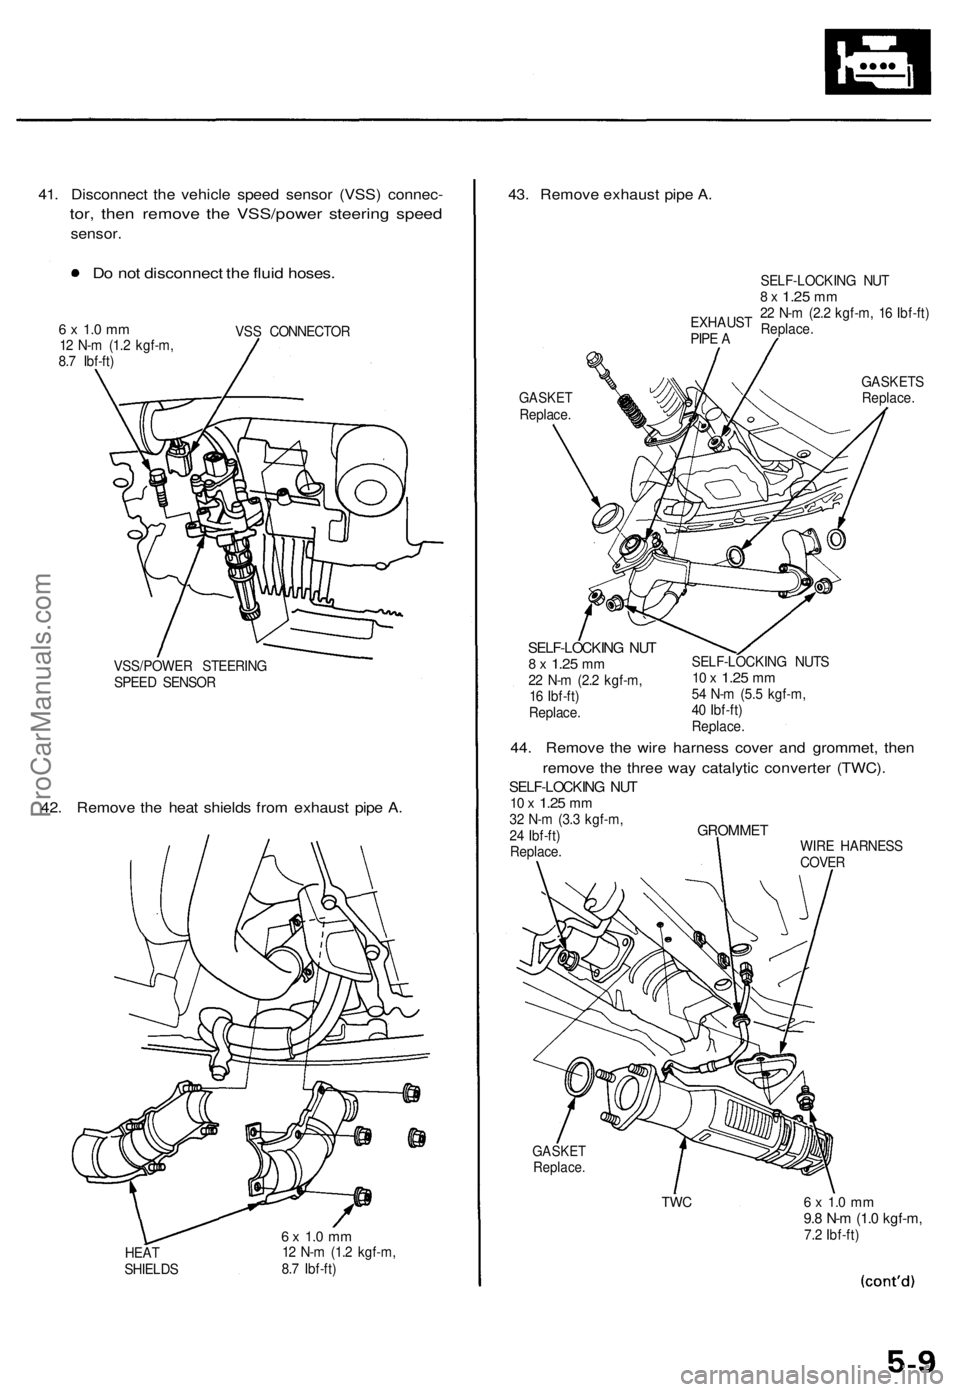 ACURA TL 1995  Service Service Manual 
41. Disconnect the vehicle speed sensor (VSS) connec-

tor, then remove the VSS/power steering speed

sensor.

Do not disconnect the fluid hoses.

6 x 1.0 mm

12 N-m (1.2 kgf-m,

8.7 Ibf-ft) 
VSS CON